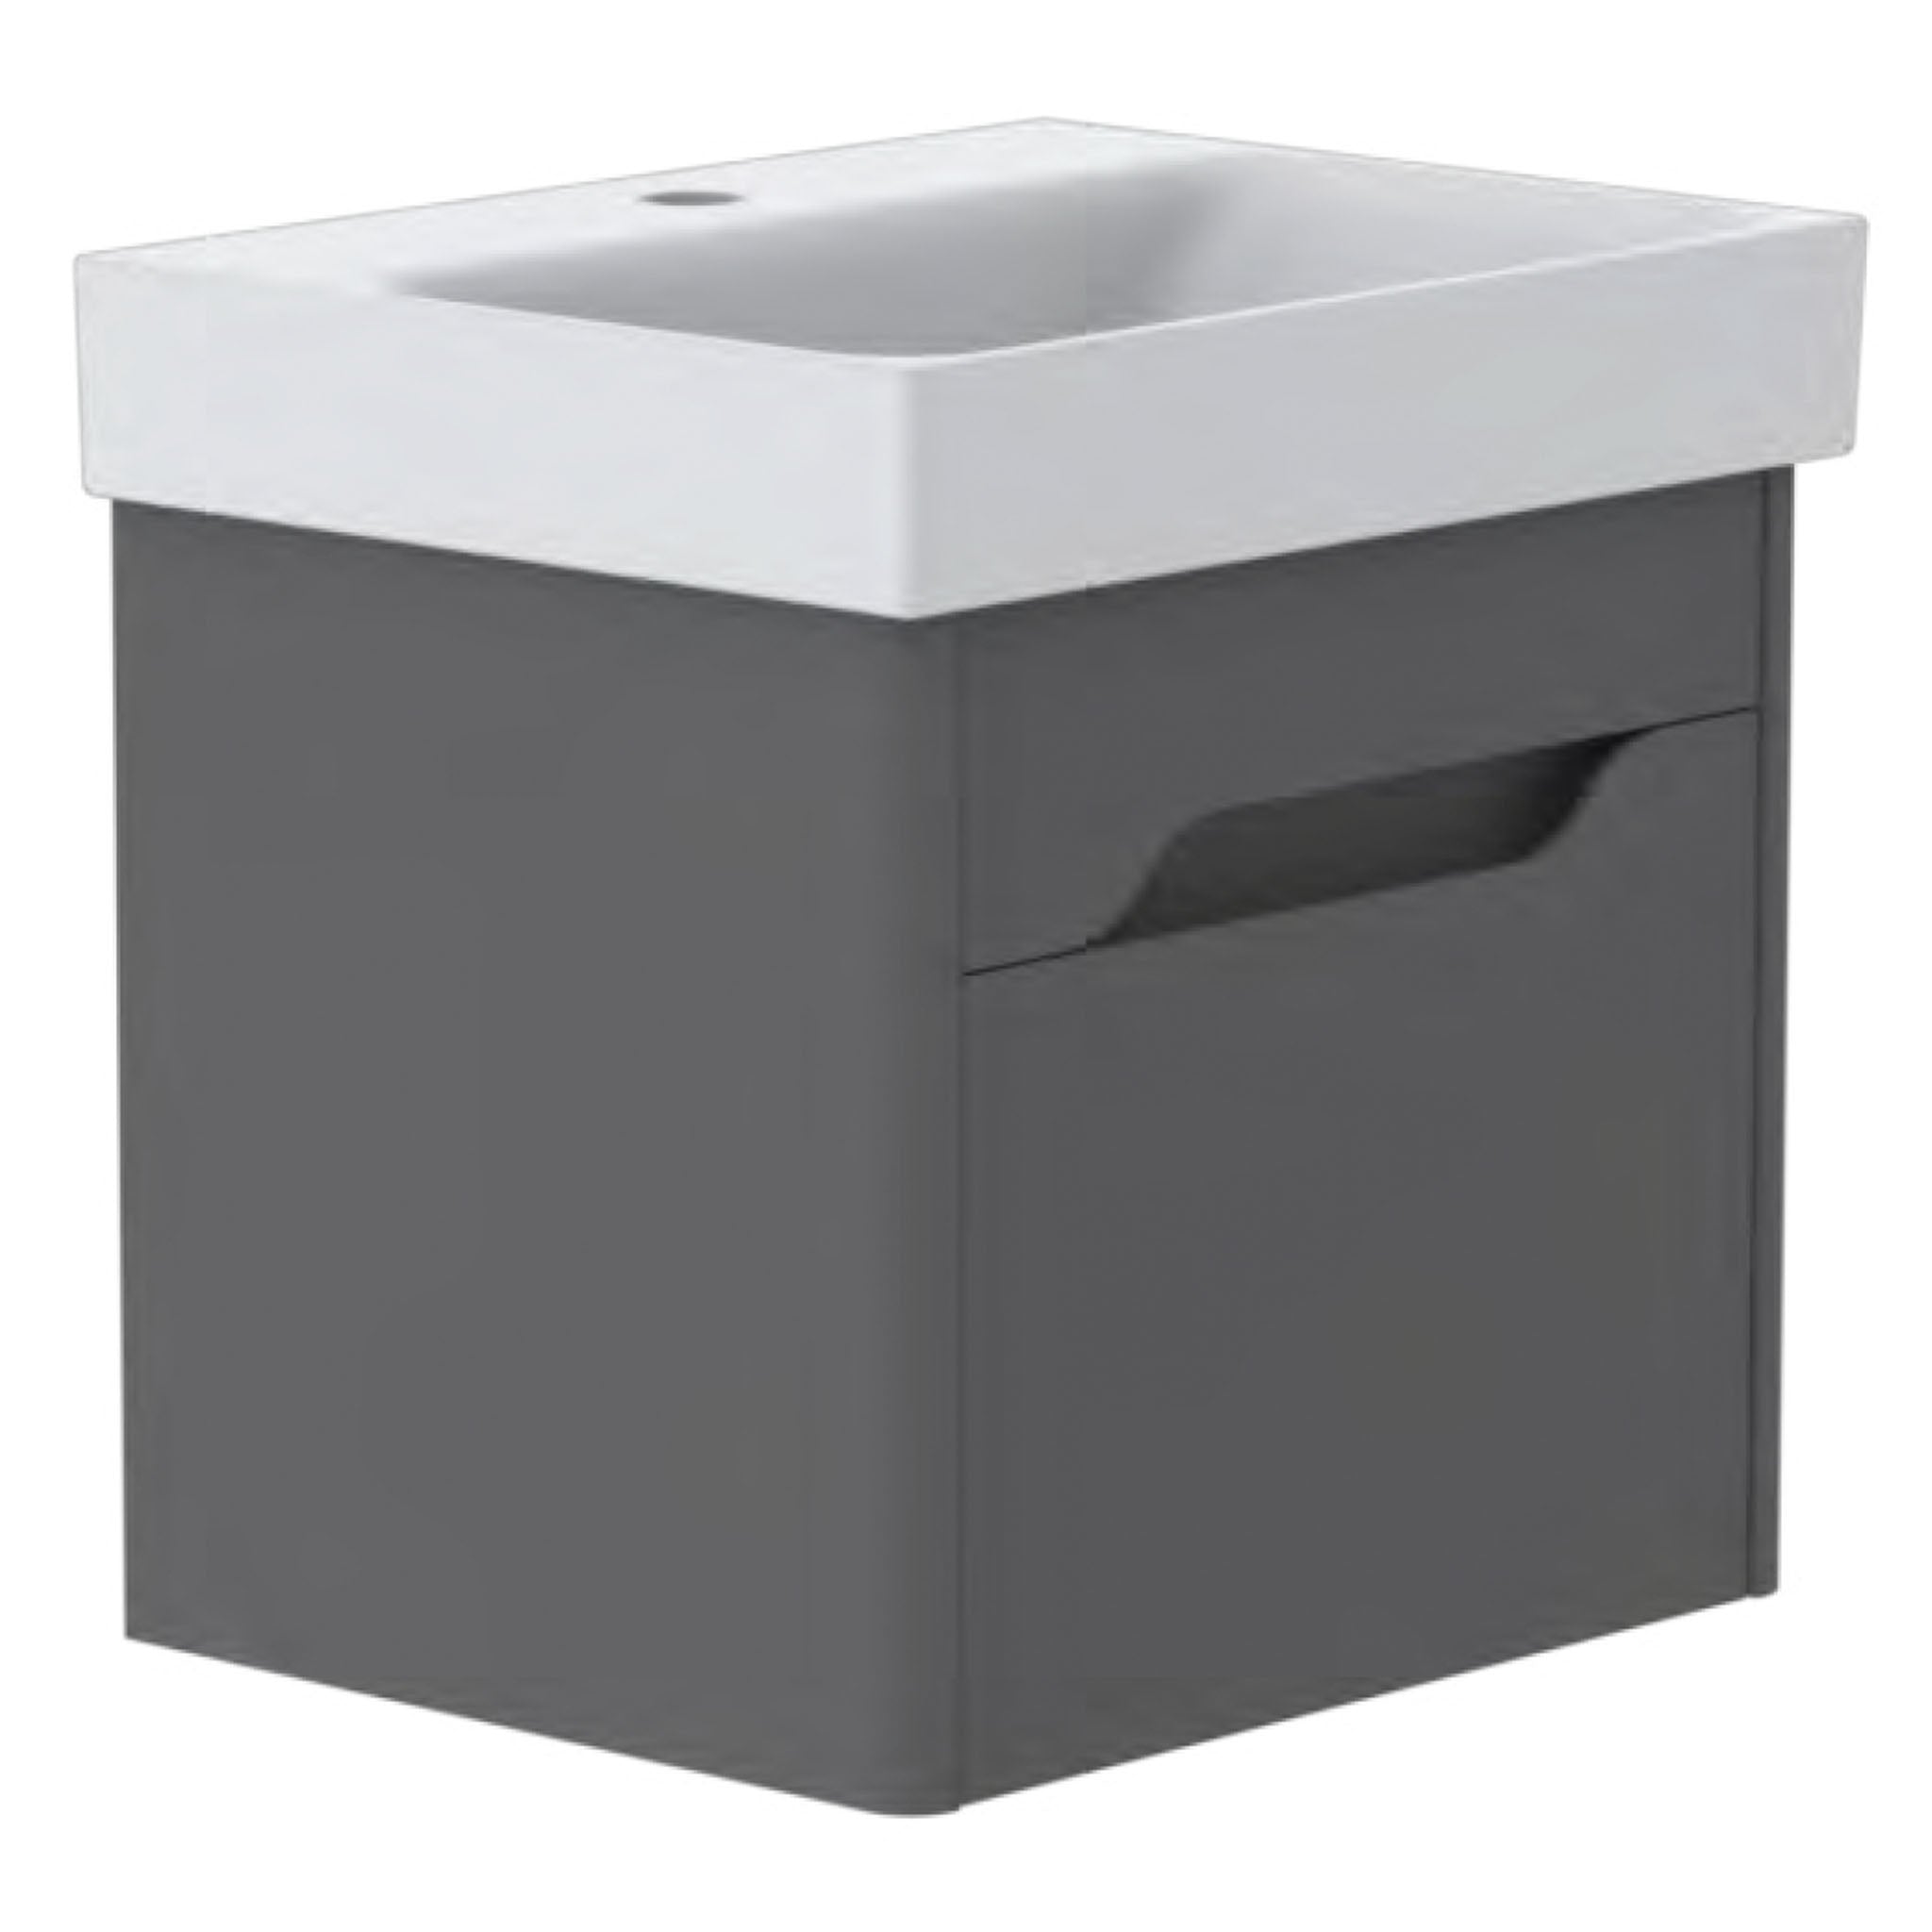 GSI Nubes Lacquer 50 x 40 1 Drawer Vanity Unit